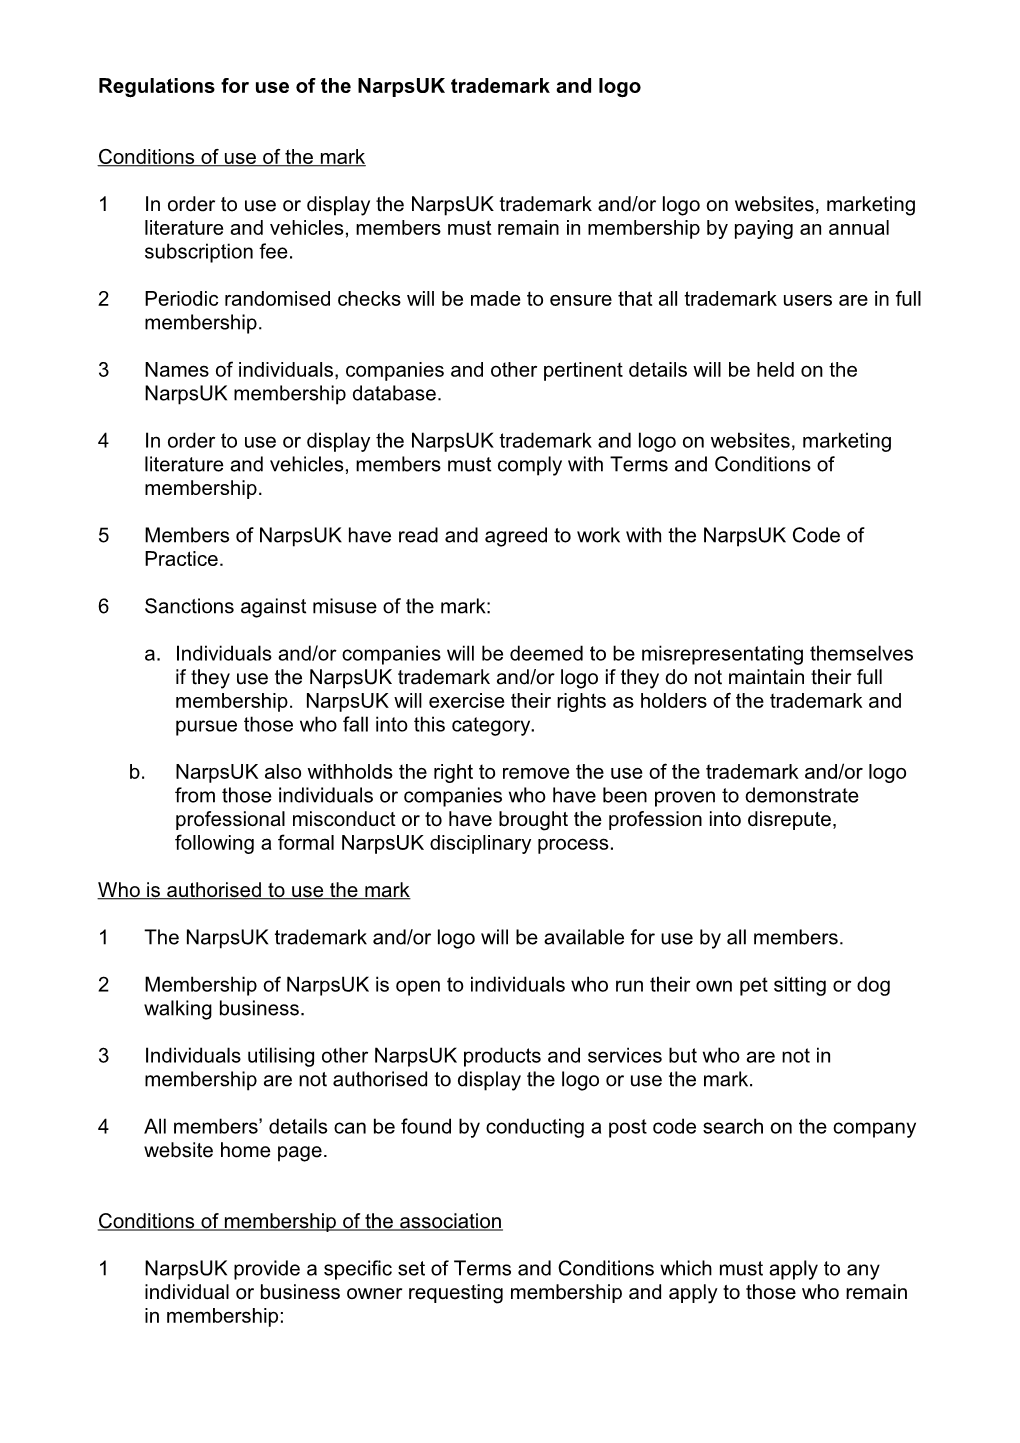 Regulations for Use of the Narpsuk Trademark and Logo